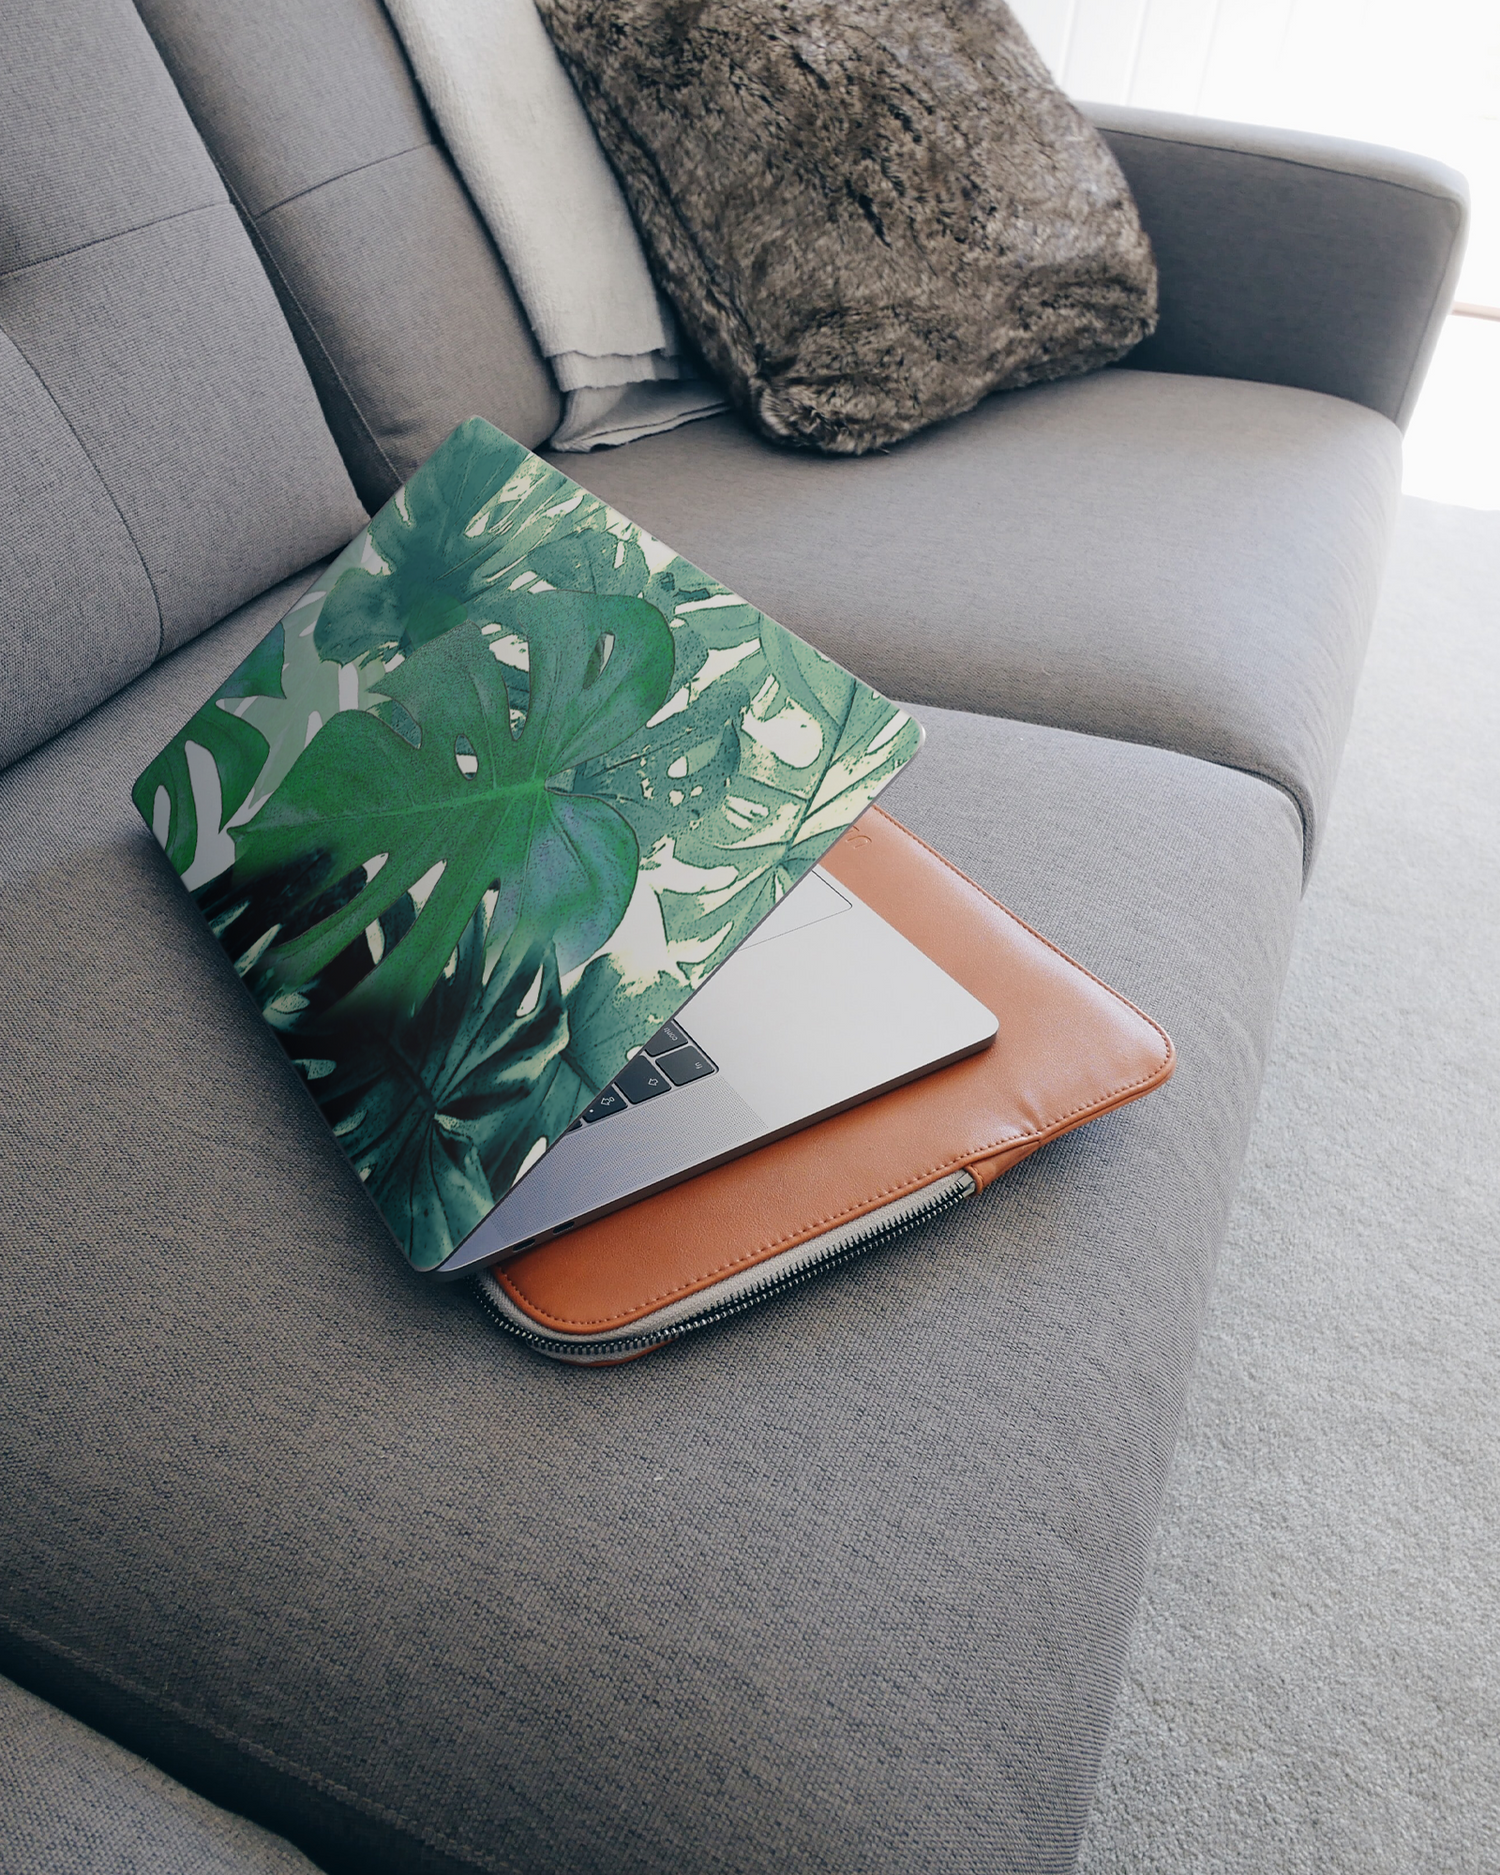 Saturated Plants Laptop Skin for 15 inch Apple MacBooks on a couch